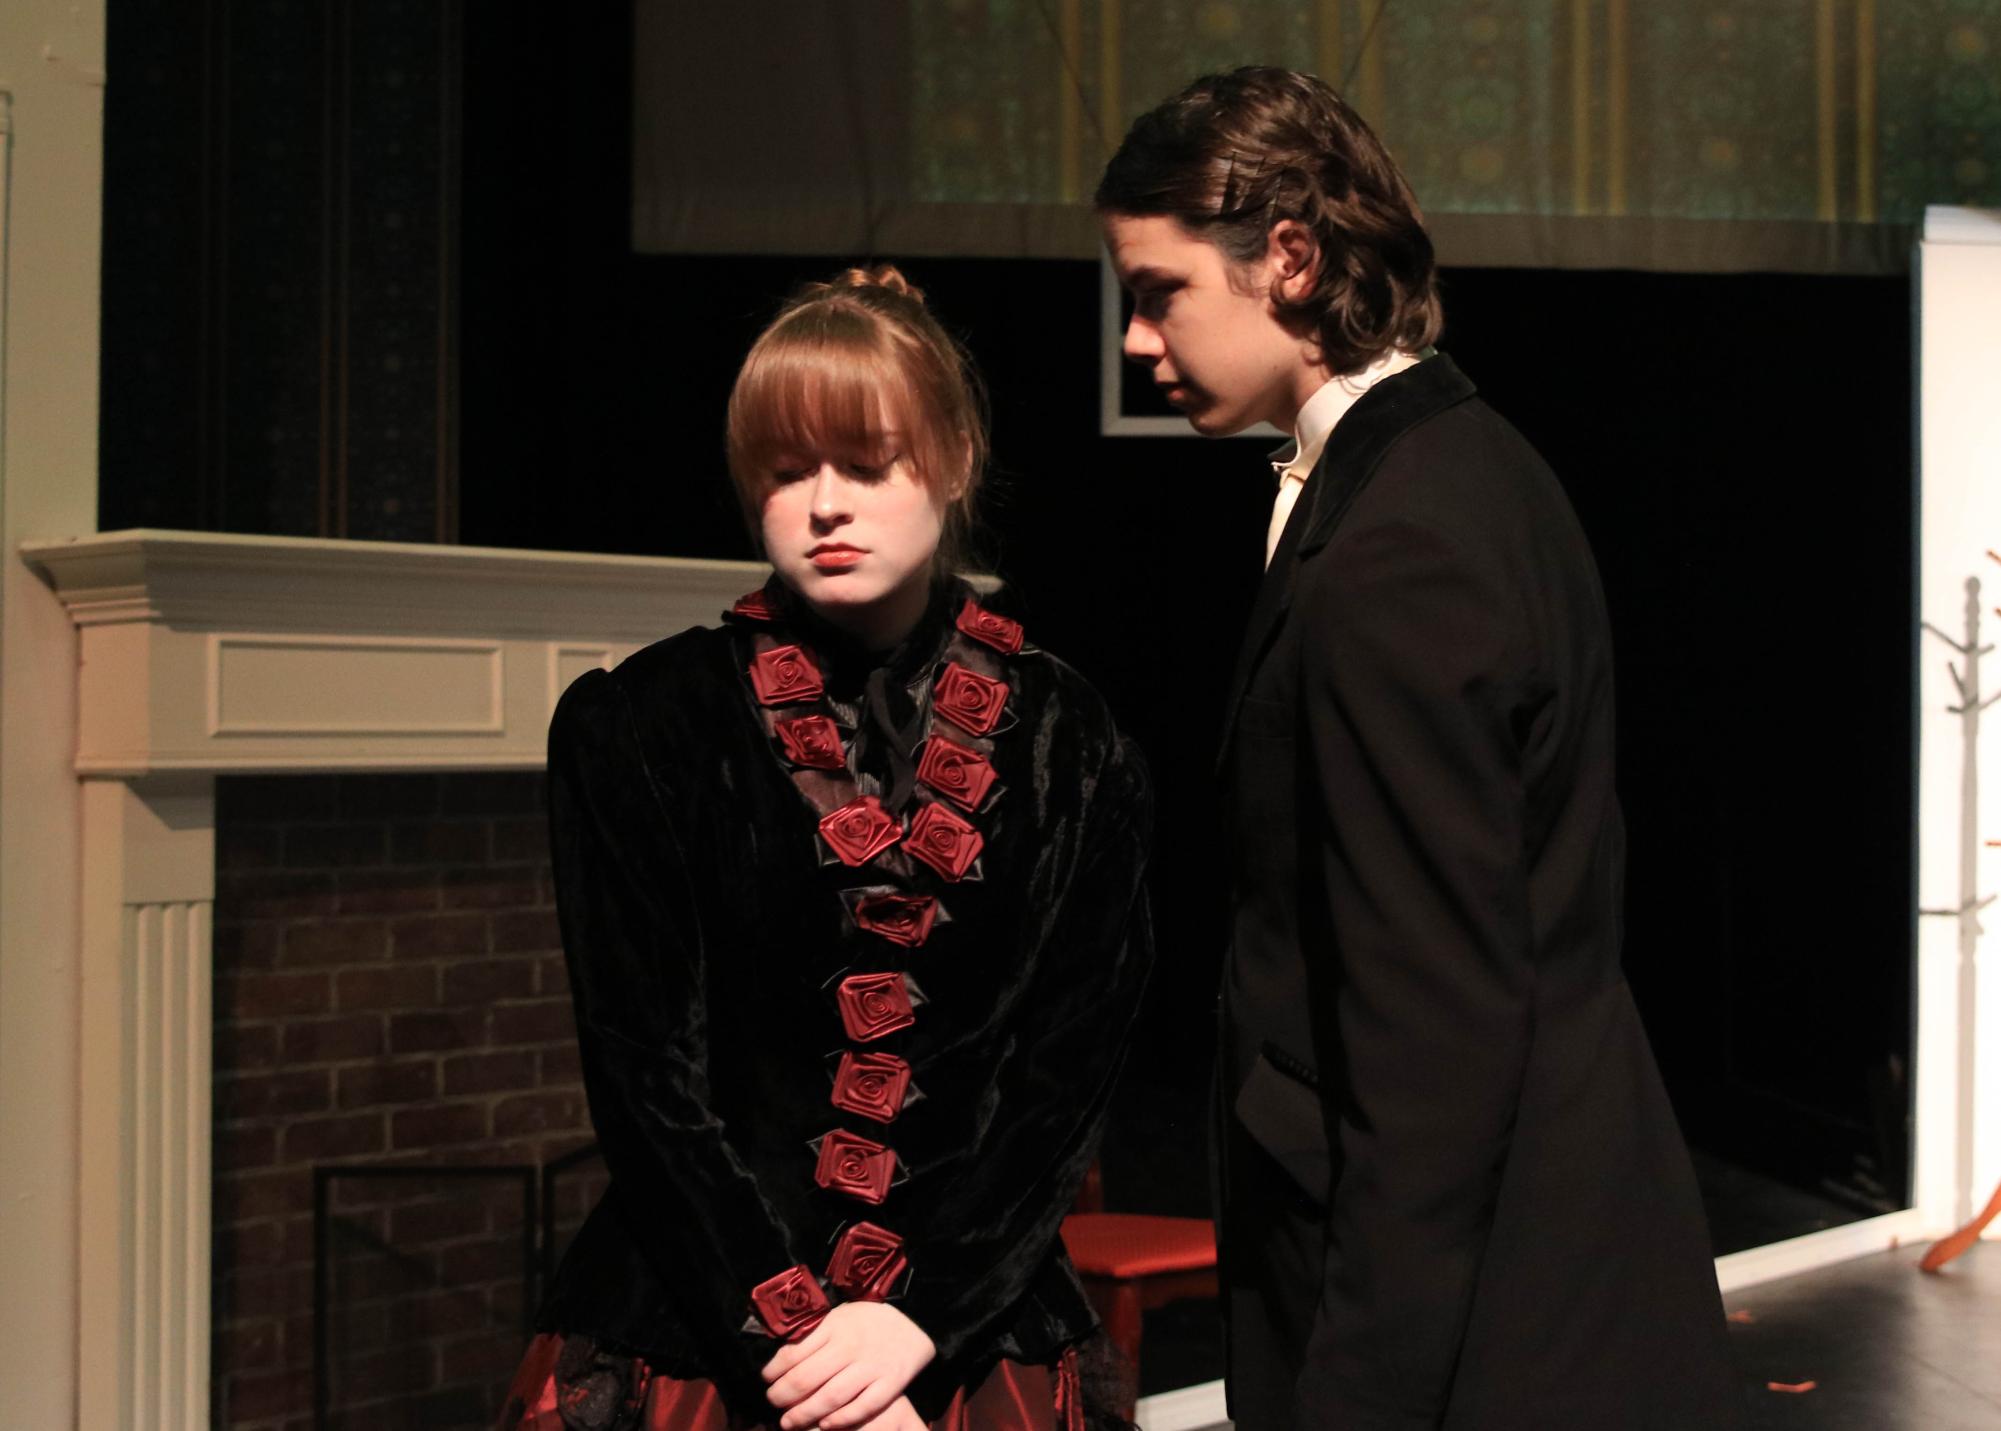 Portraying the role of Nora in A Dolls House Part 2, senior Maddie Sparta looks away as Torvald (portrayed by senior Wesley Jackson) approaches her in a tense conversation. A Dolls House Part 2 follows the plotline established in the prequel with a 16 year time jump.